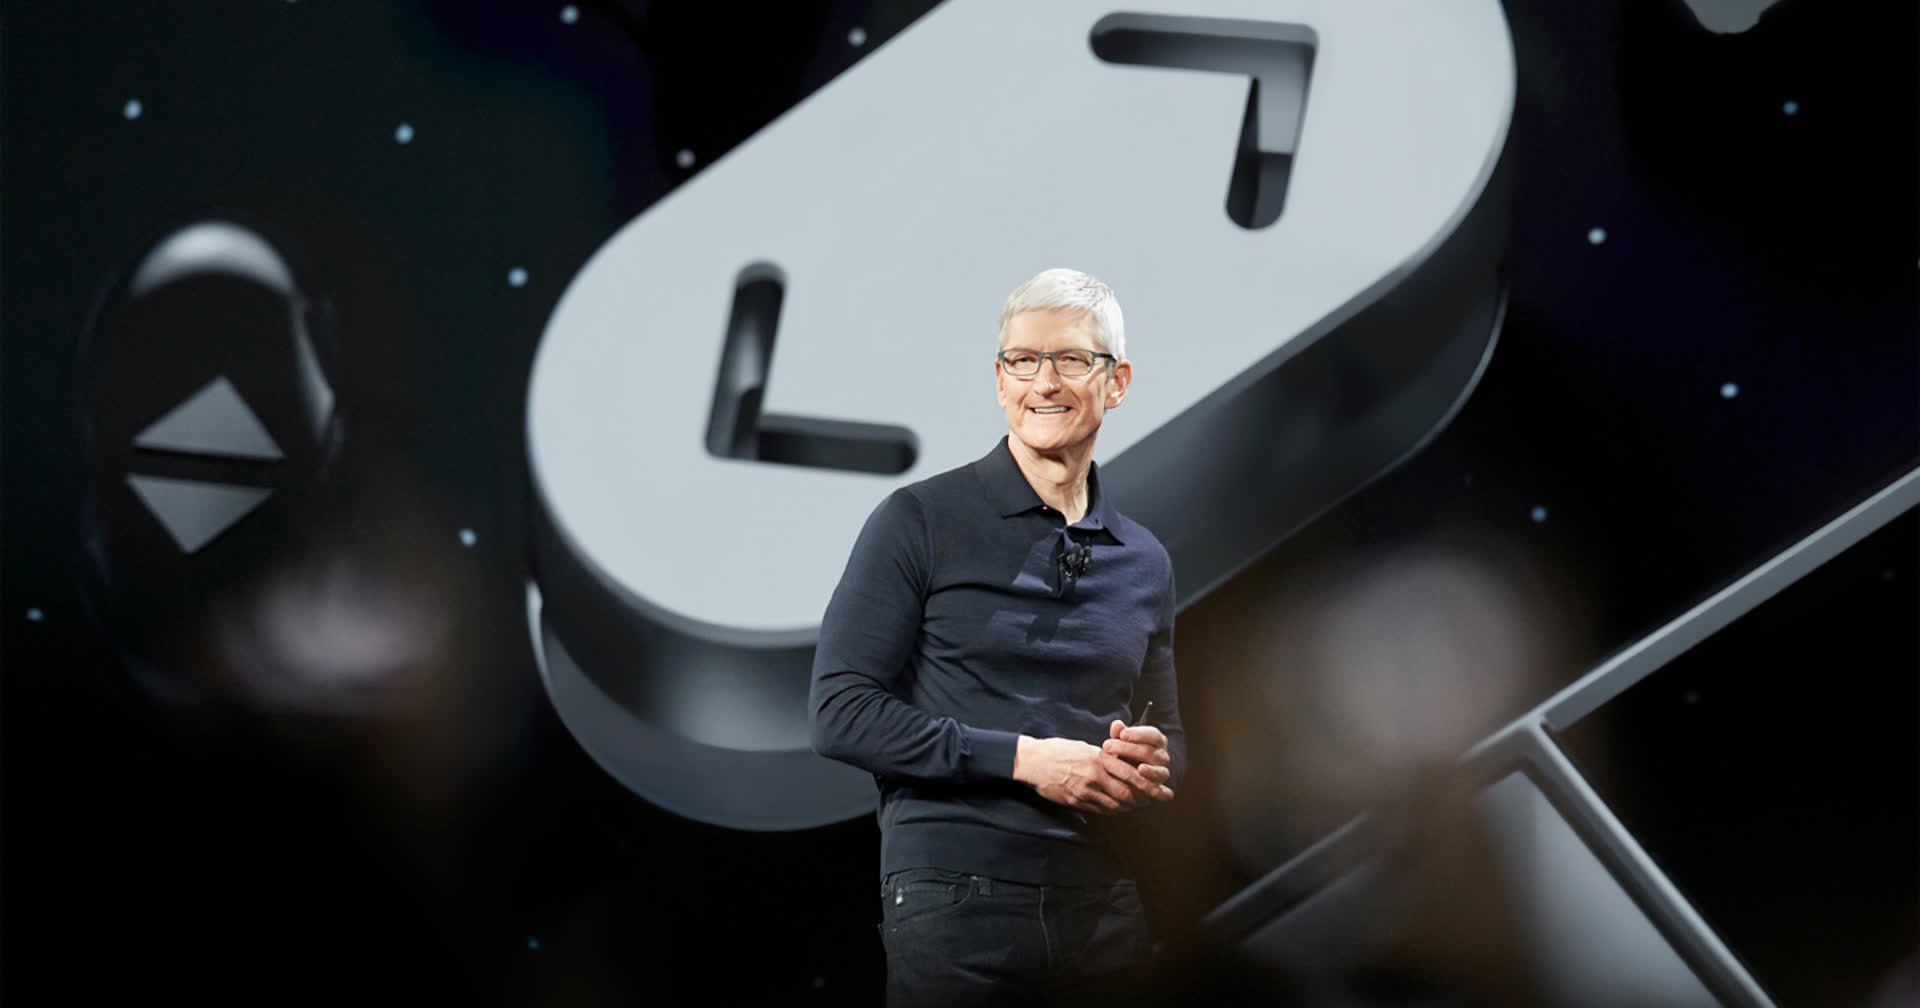 Tim Cook said to be rushing the launch of Apple's mixed reality headset despite objections from his team